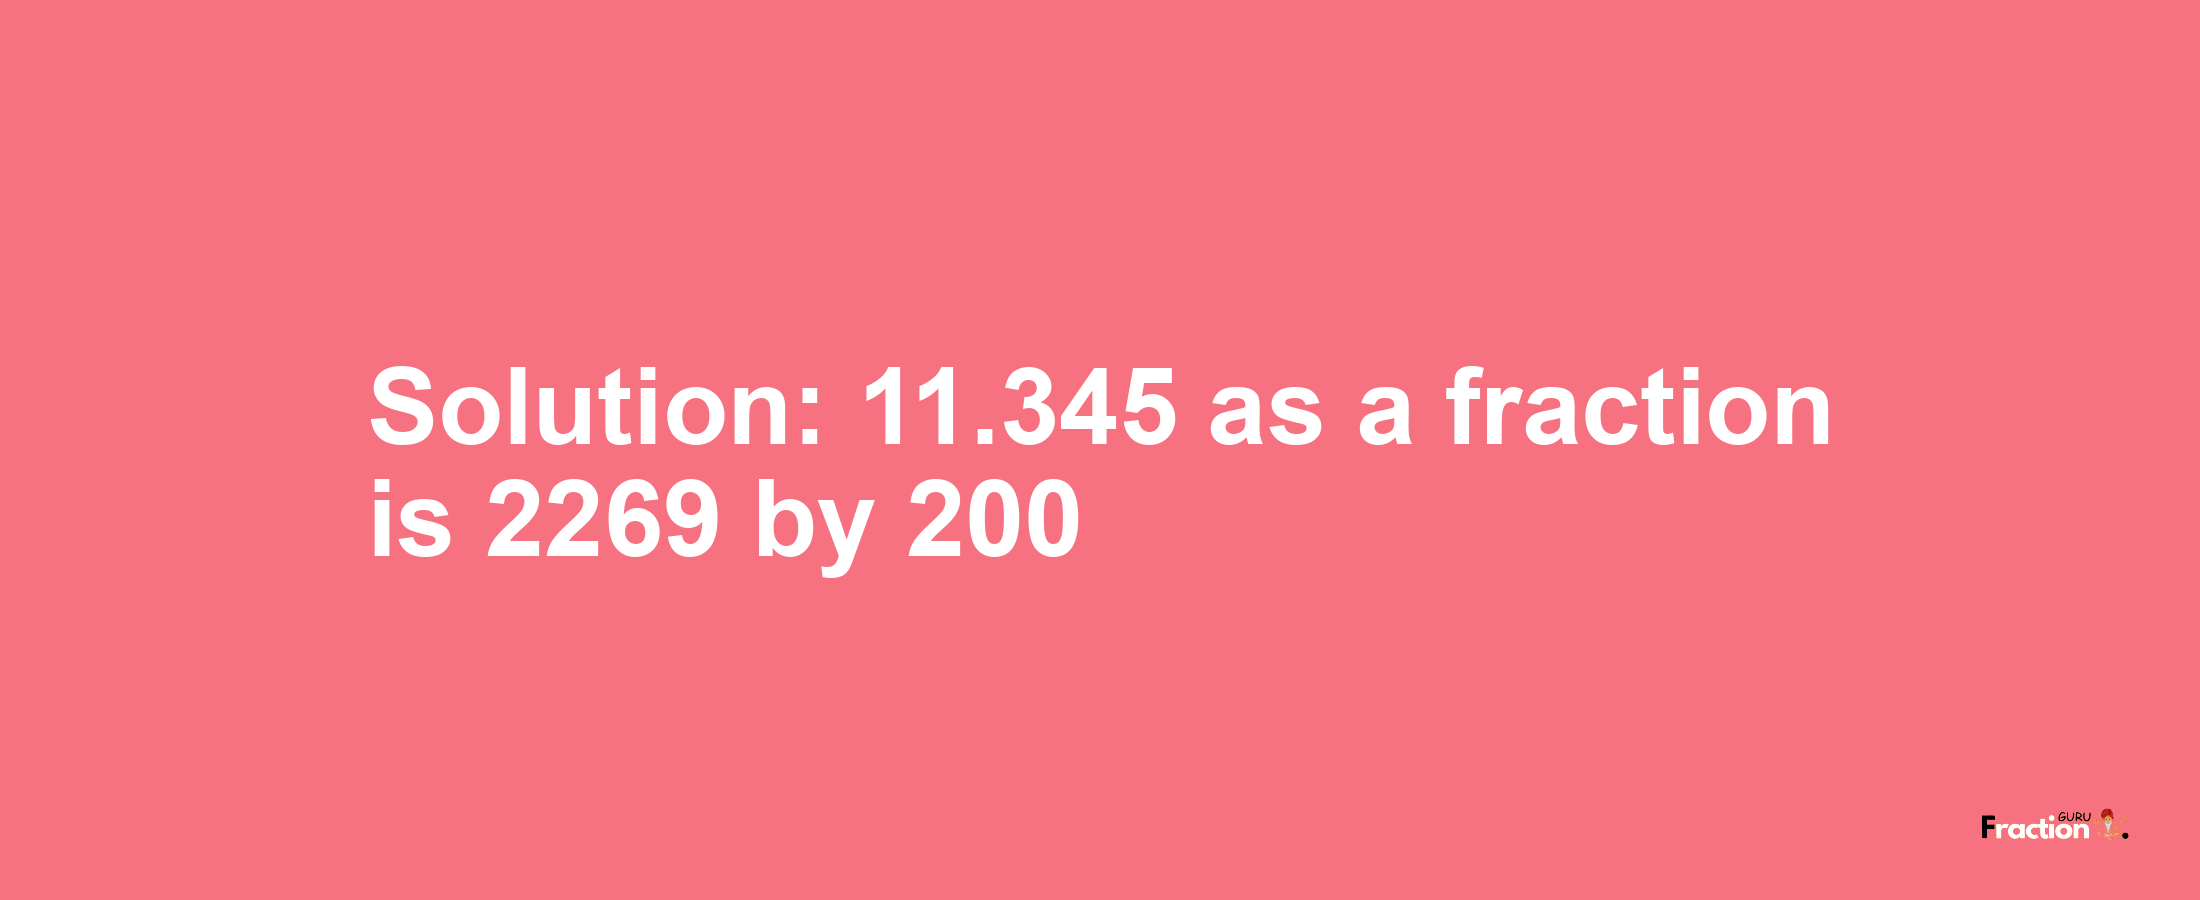 Solution:11.345 as a fraction is 2269/200